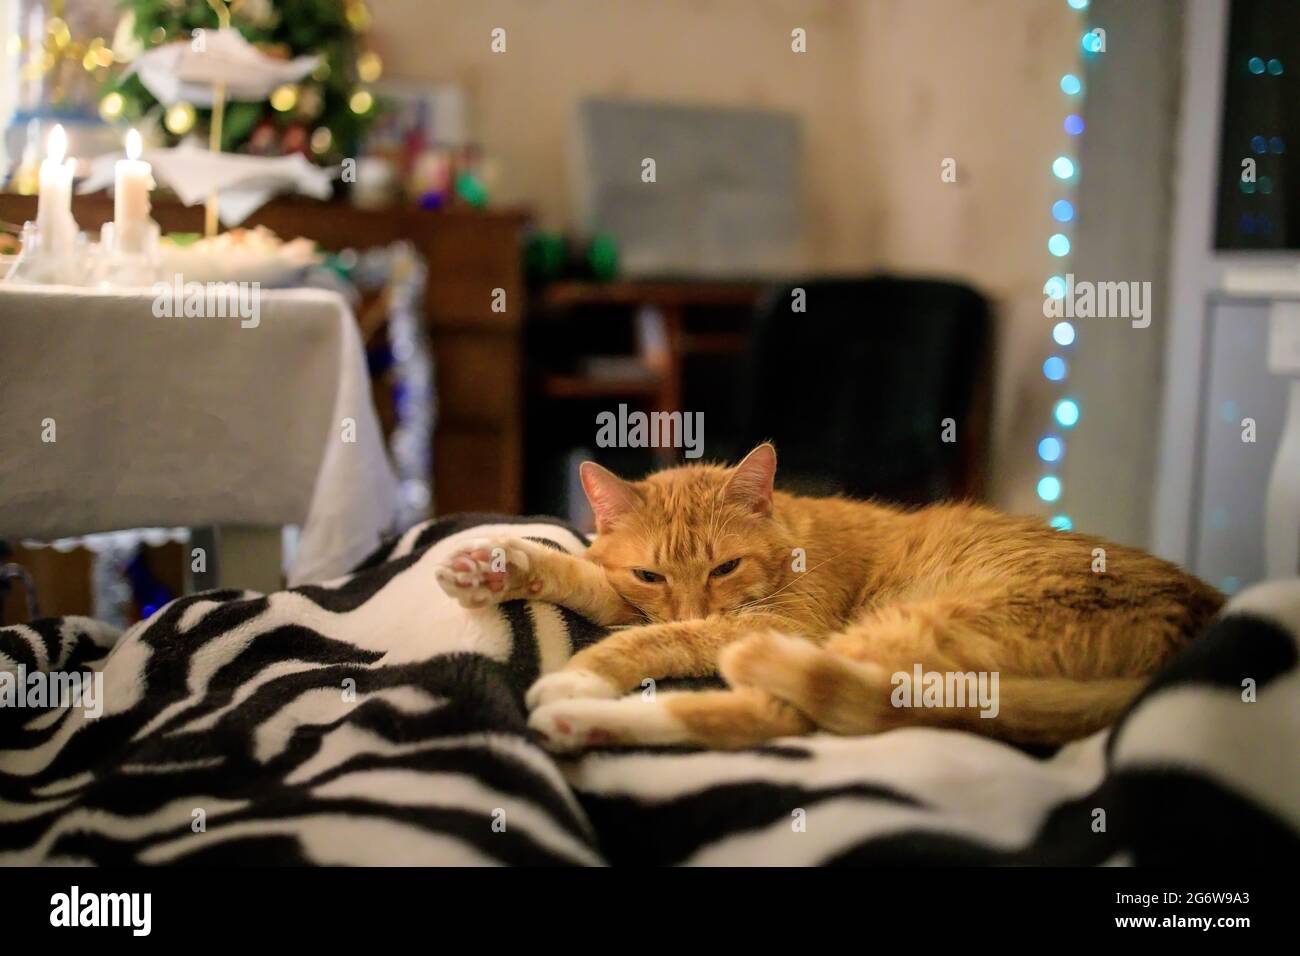 Fluffy ginger cat sleeps on a bedspread against the background of a christmas tree and a festive table. Stock Photo